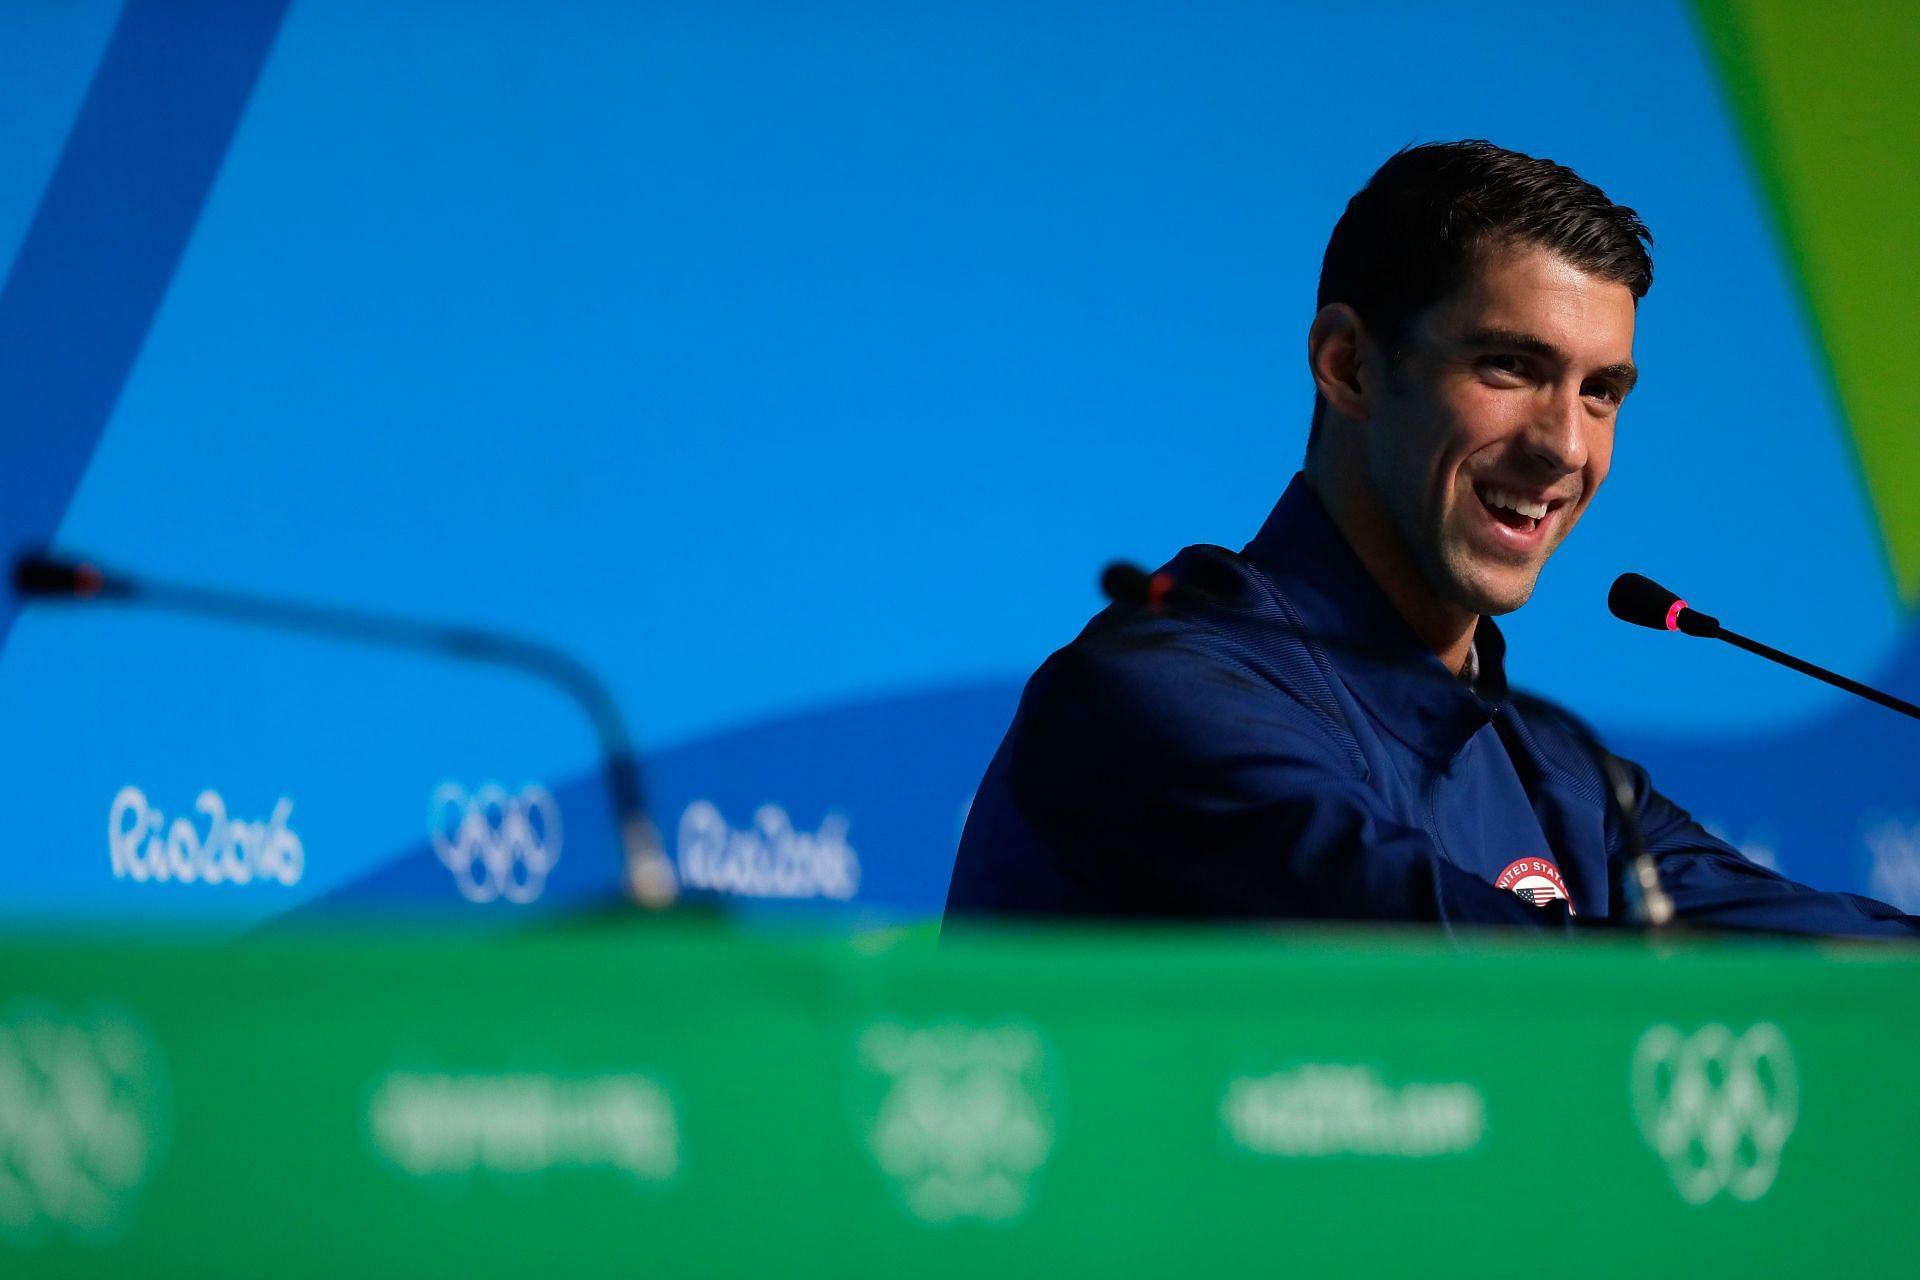 Michael Phelps of the United States speaks during a press conference at the Main Press Centre on August 14, 2016 in Rio de Janeiro, Brazil. (Photo by Jamie Squire/Getty Images)